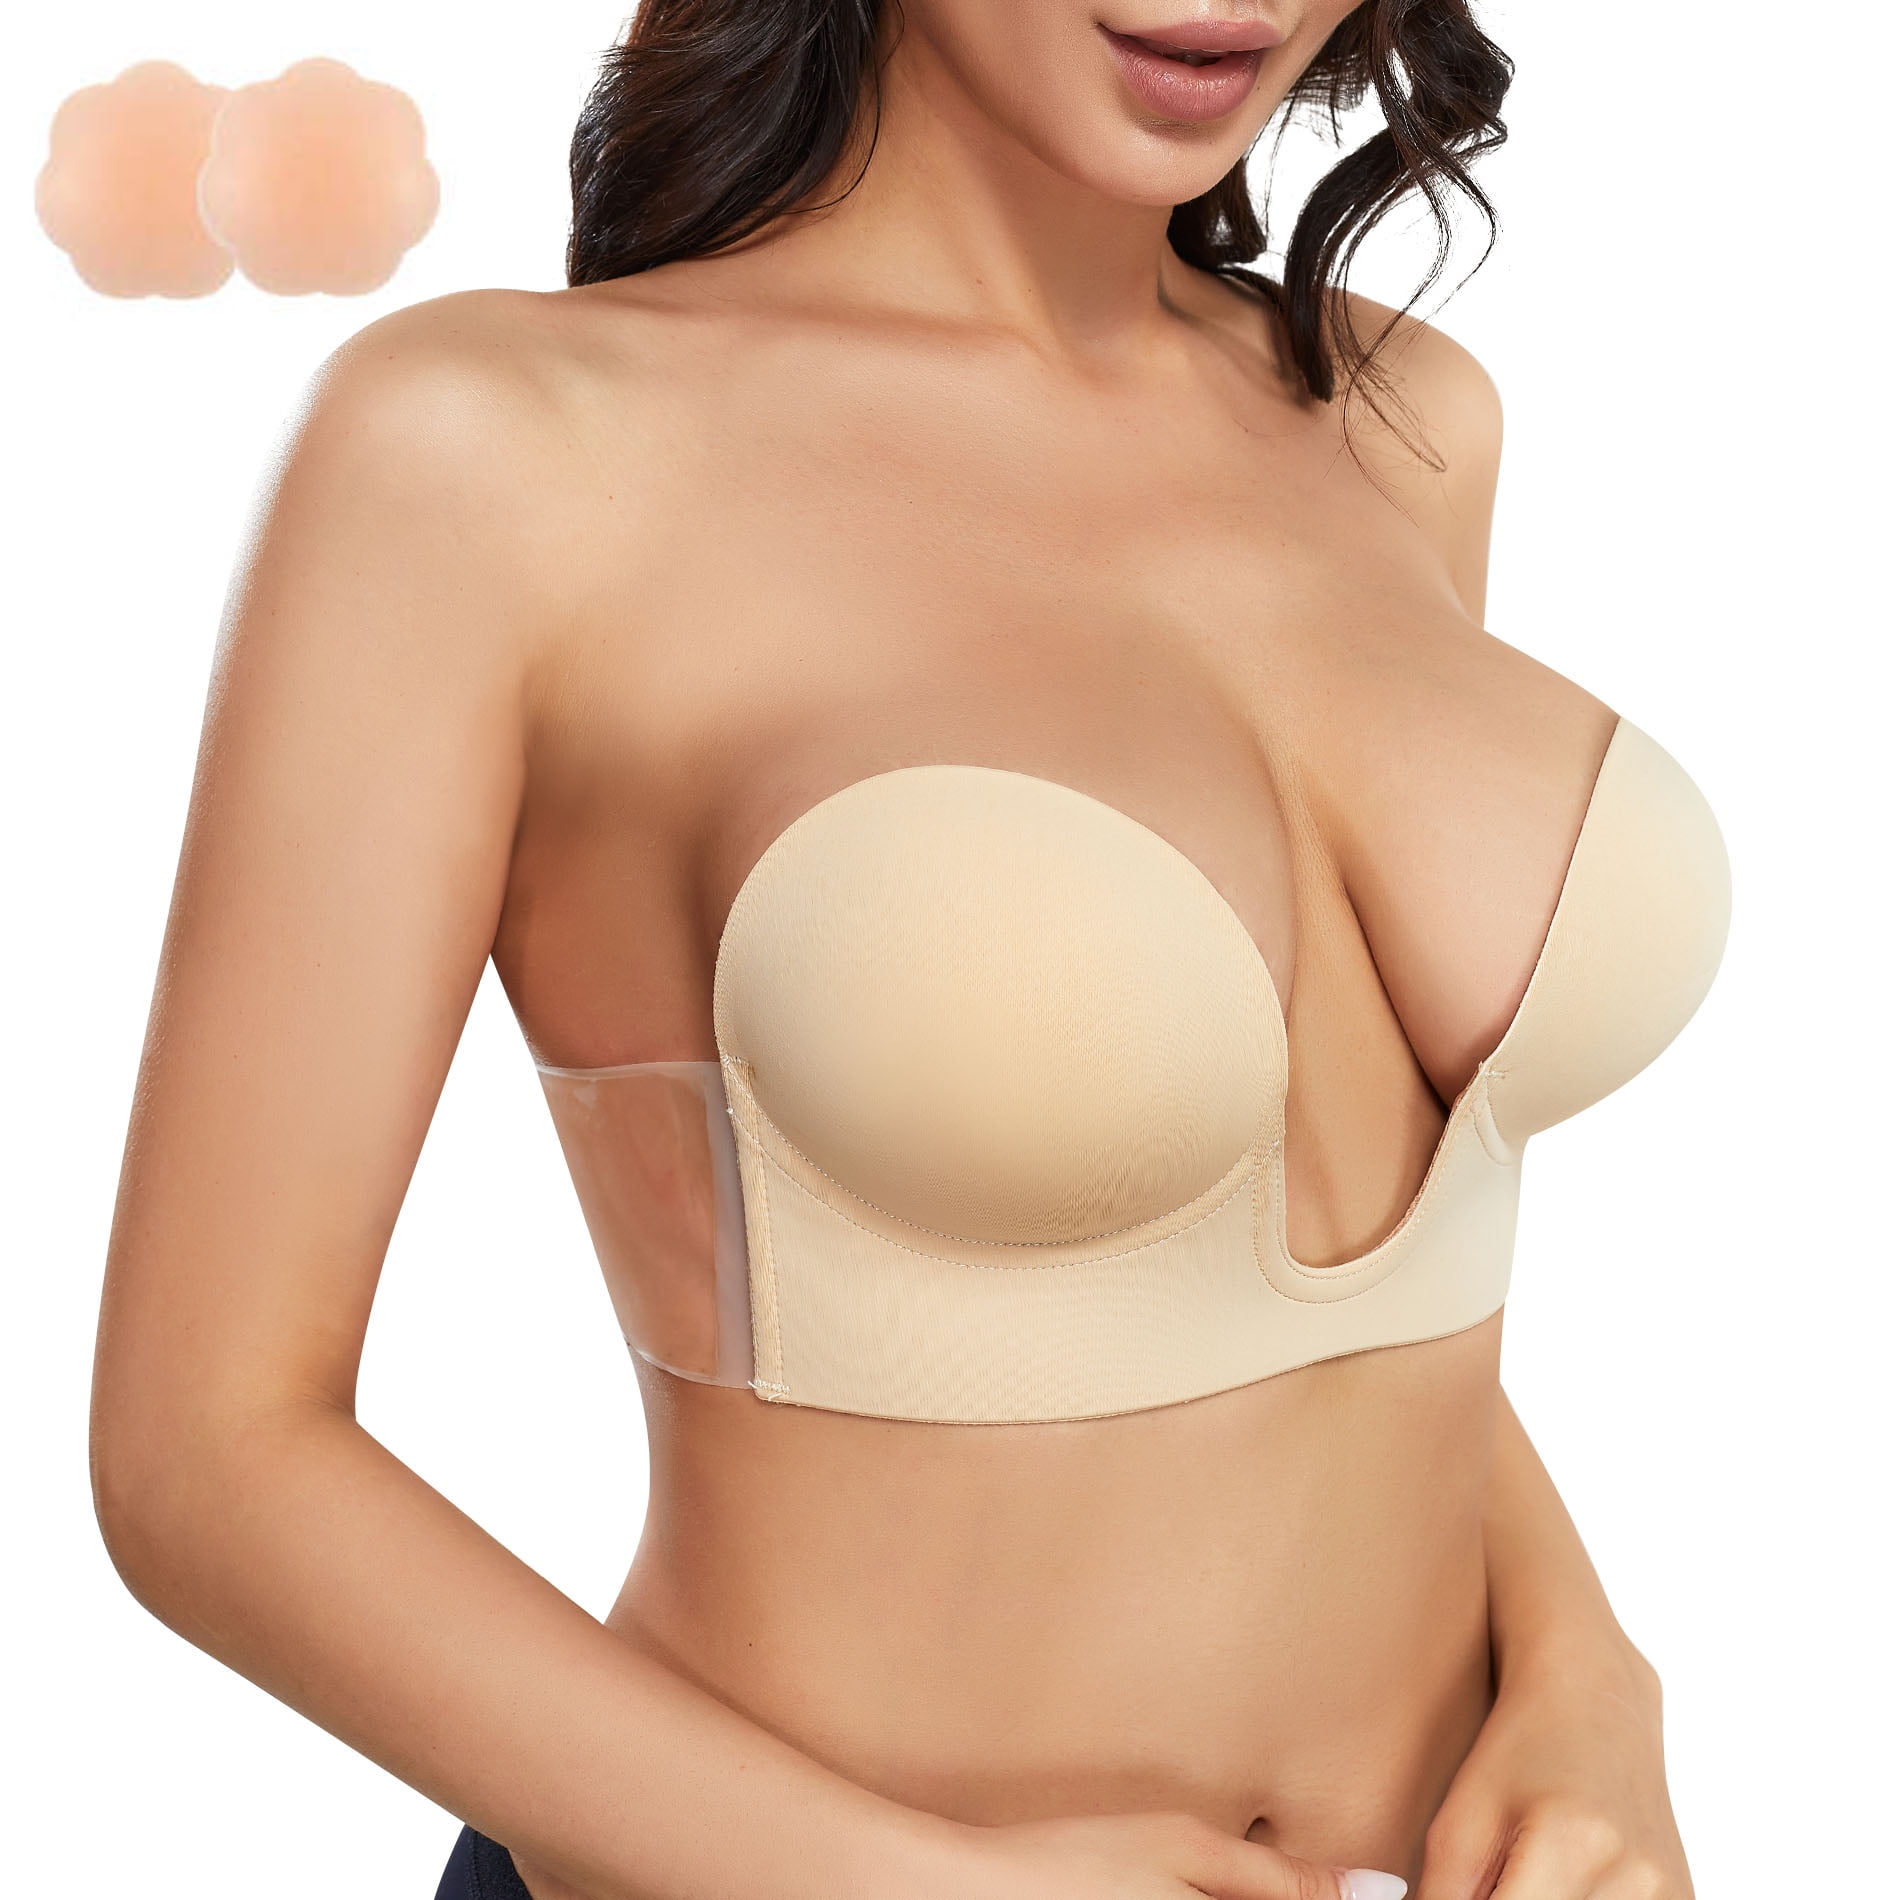 Trendzino Reusable Pushup Sticky Invisible Bra Silicone Push Up Bra Pads  Price in India - Buy Trendzino Reusable Pushup Sticky Invisible Bra  Silicone Push Up Bra Pads online at